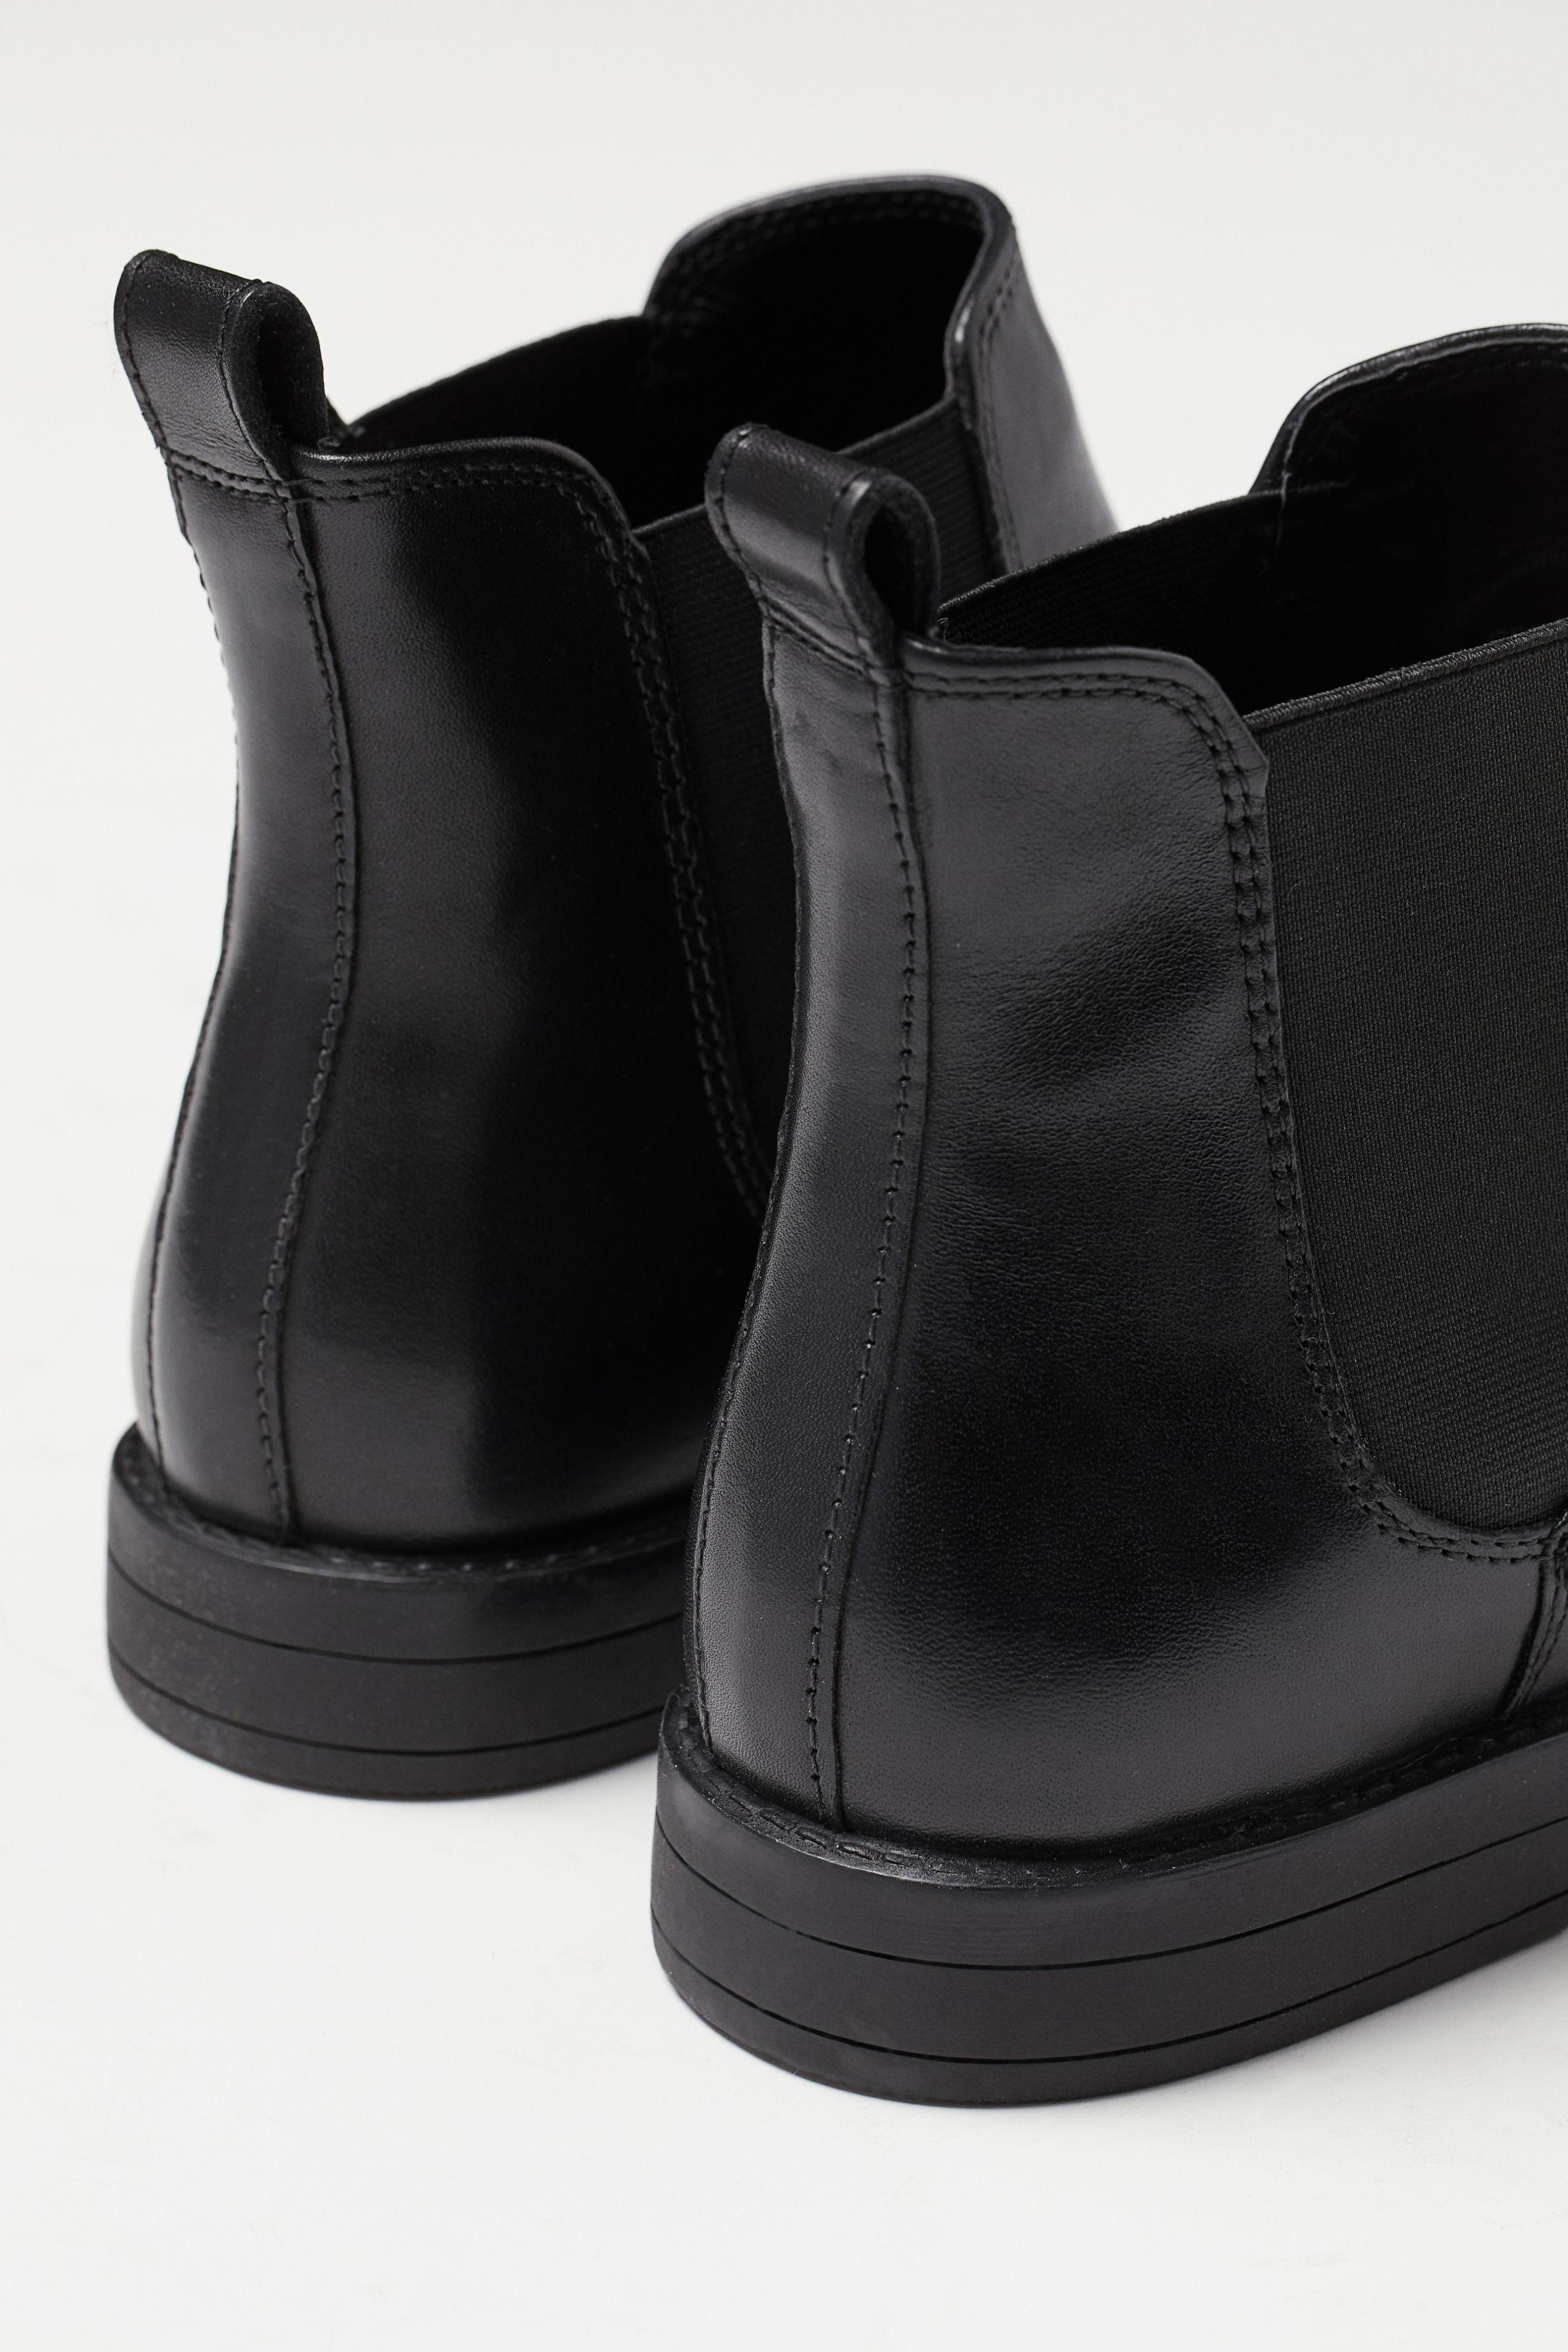 H&M Leather Chelsea Boots in Black - Lyst